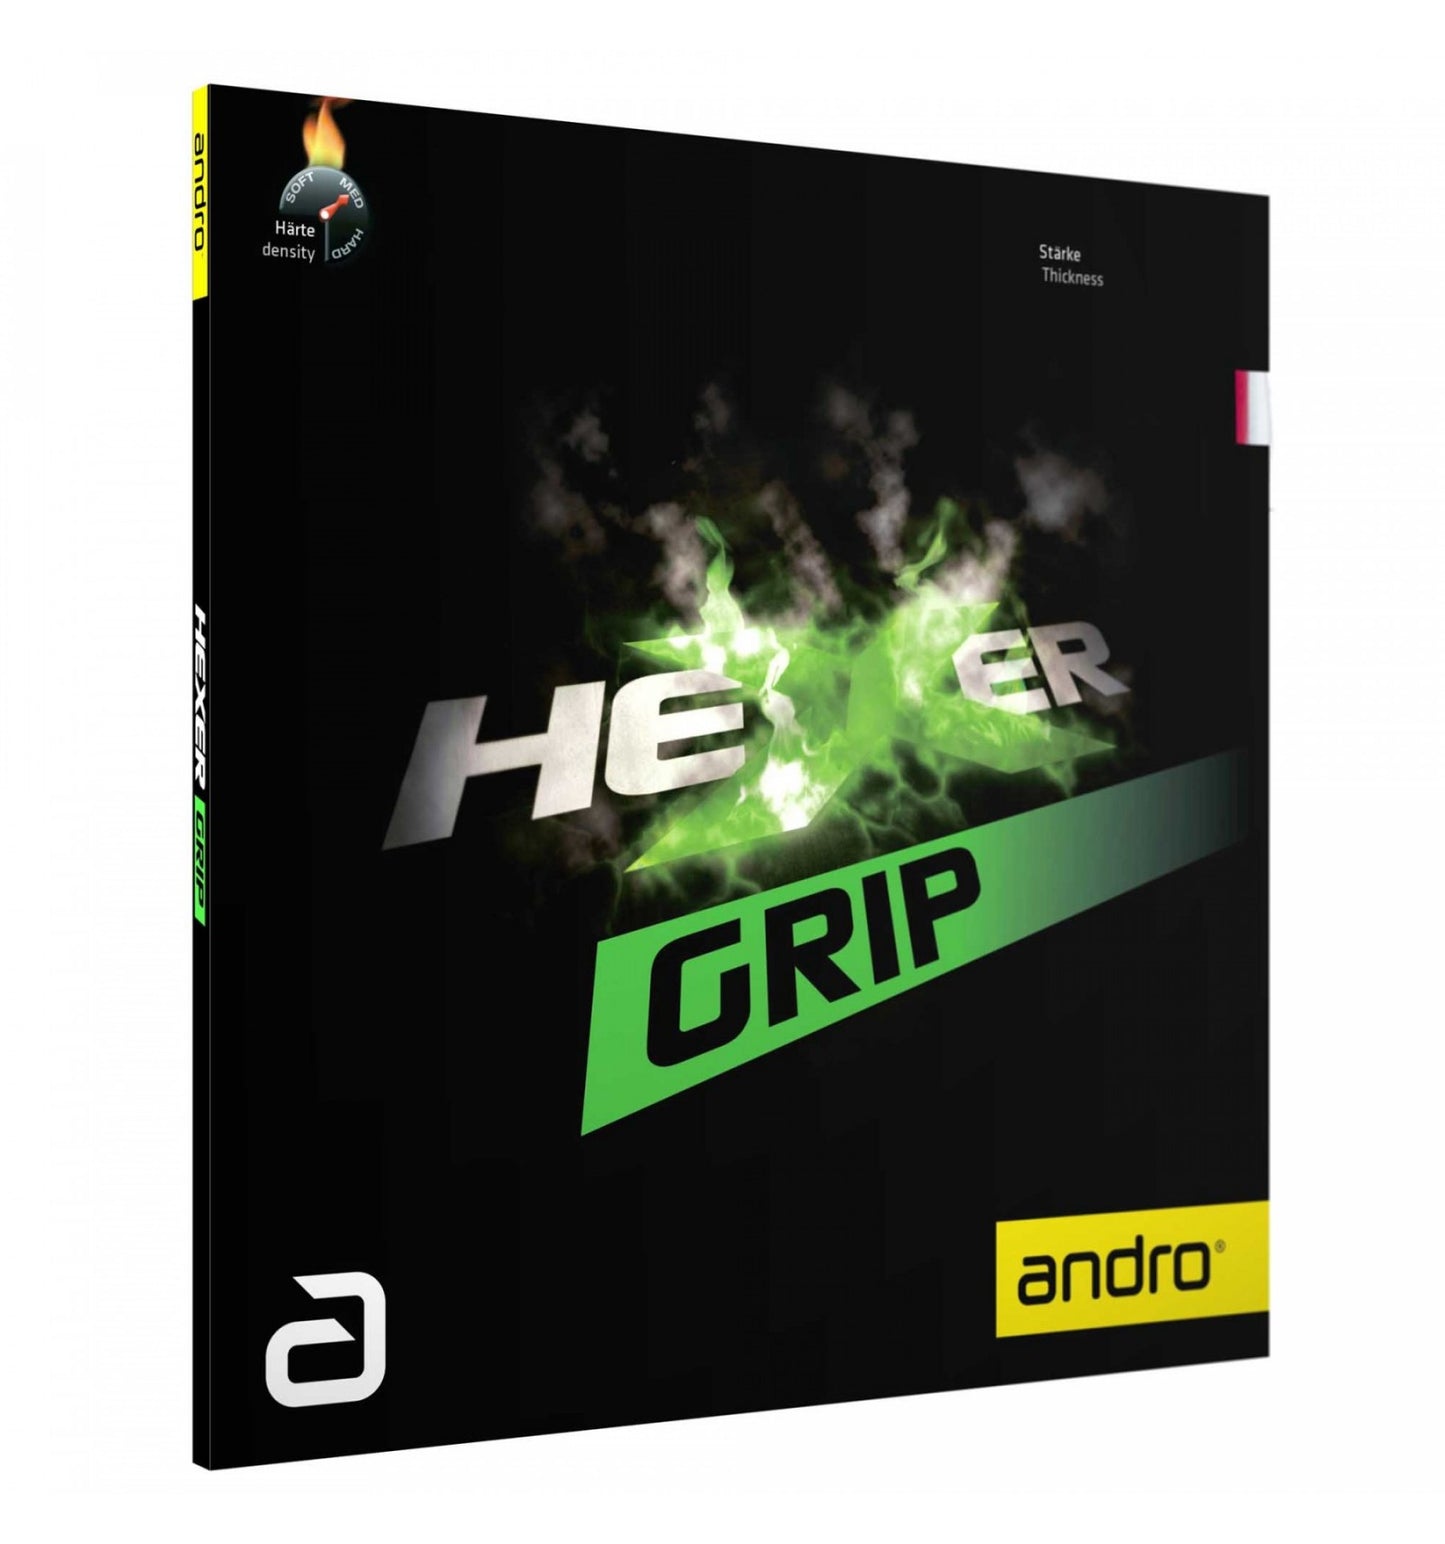 Andro Hexer Grip - Killypong